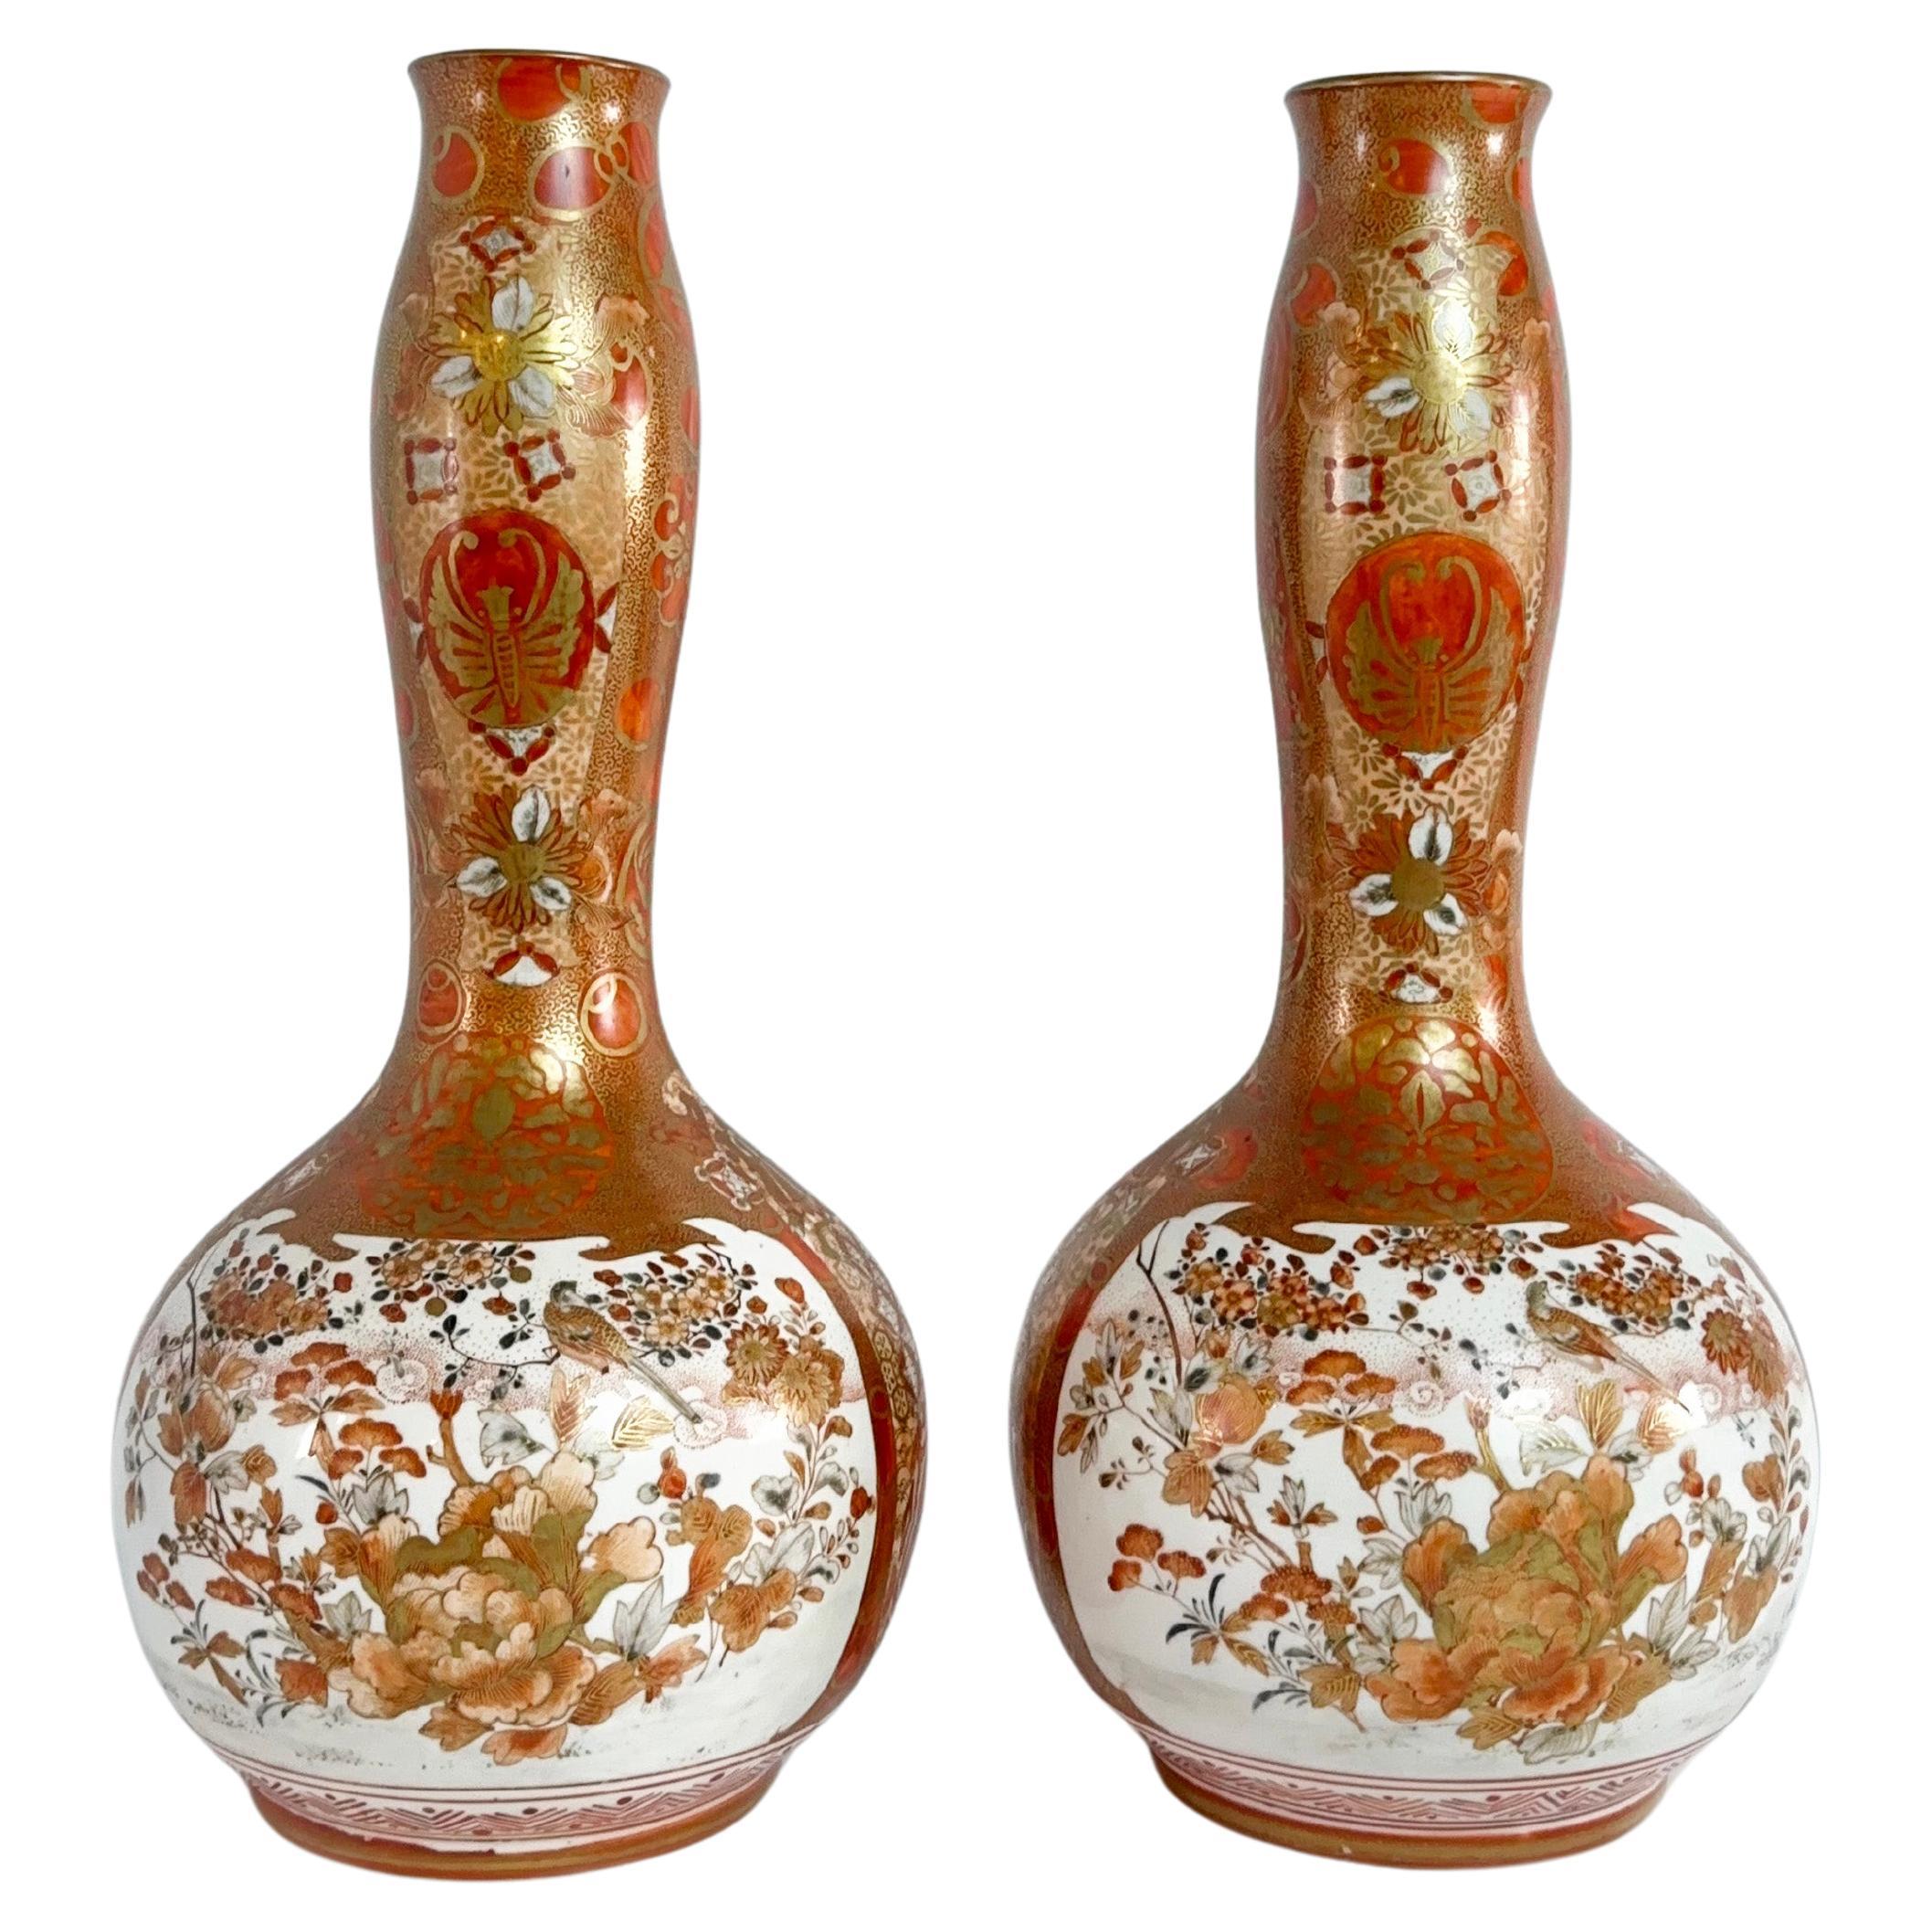 19th Century Japanese Double Gourd Vase -  Meiji Period Pair - Signed 